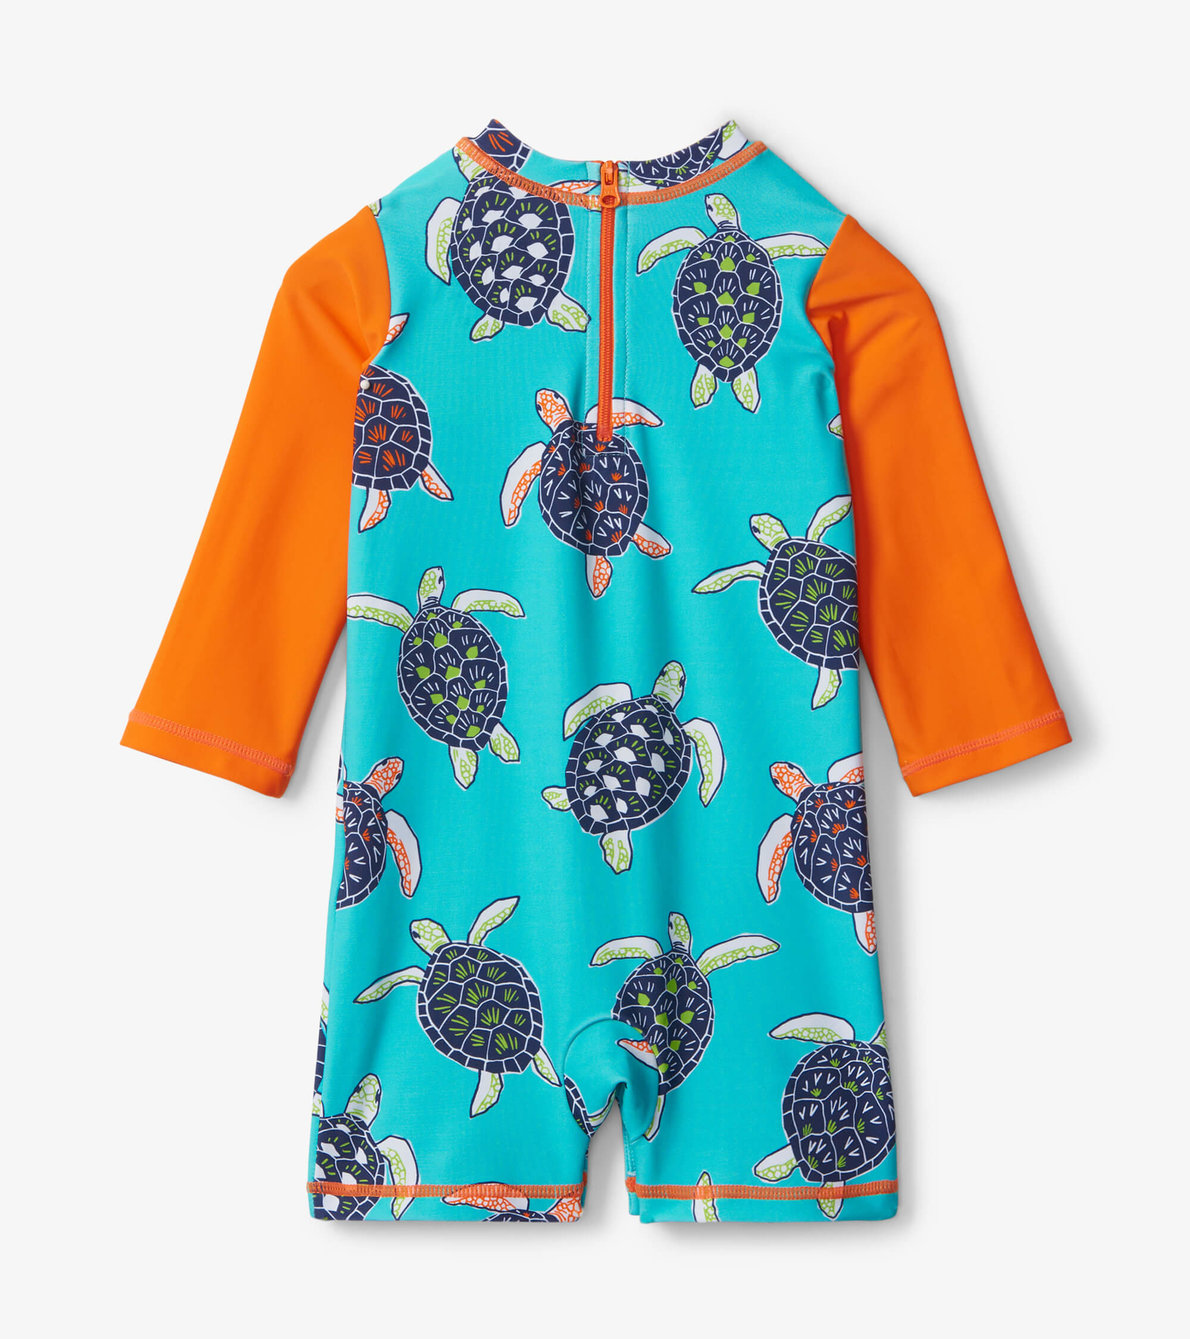 View larger image of Tropical Turtles Baby One-Piece Rashguard